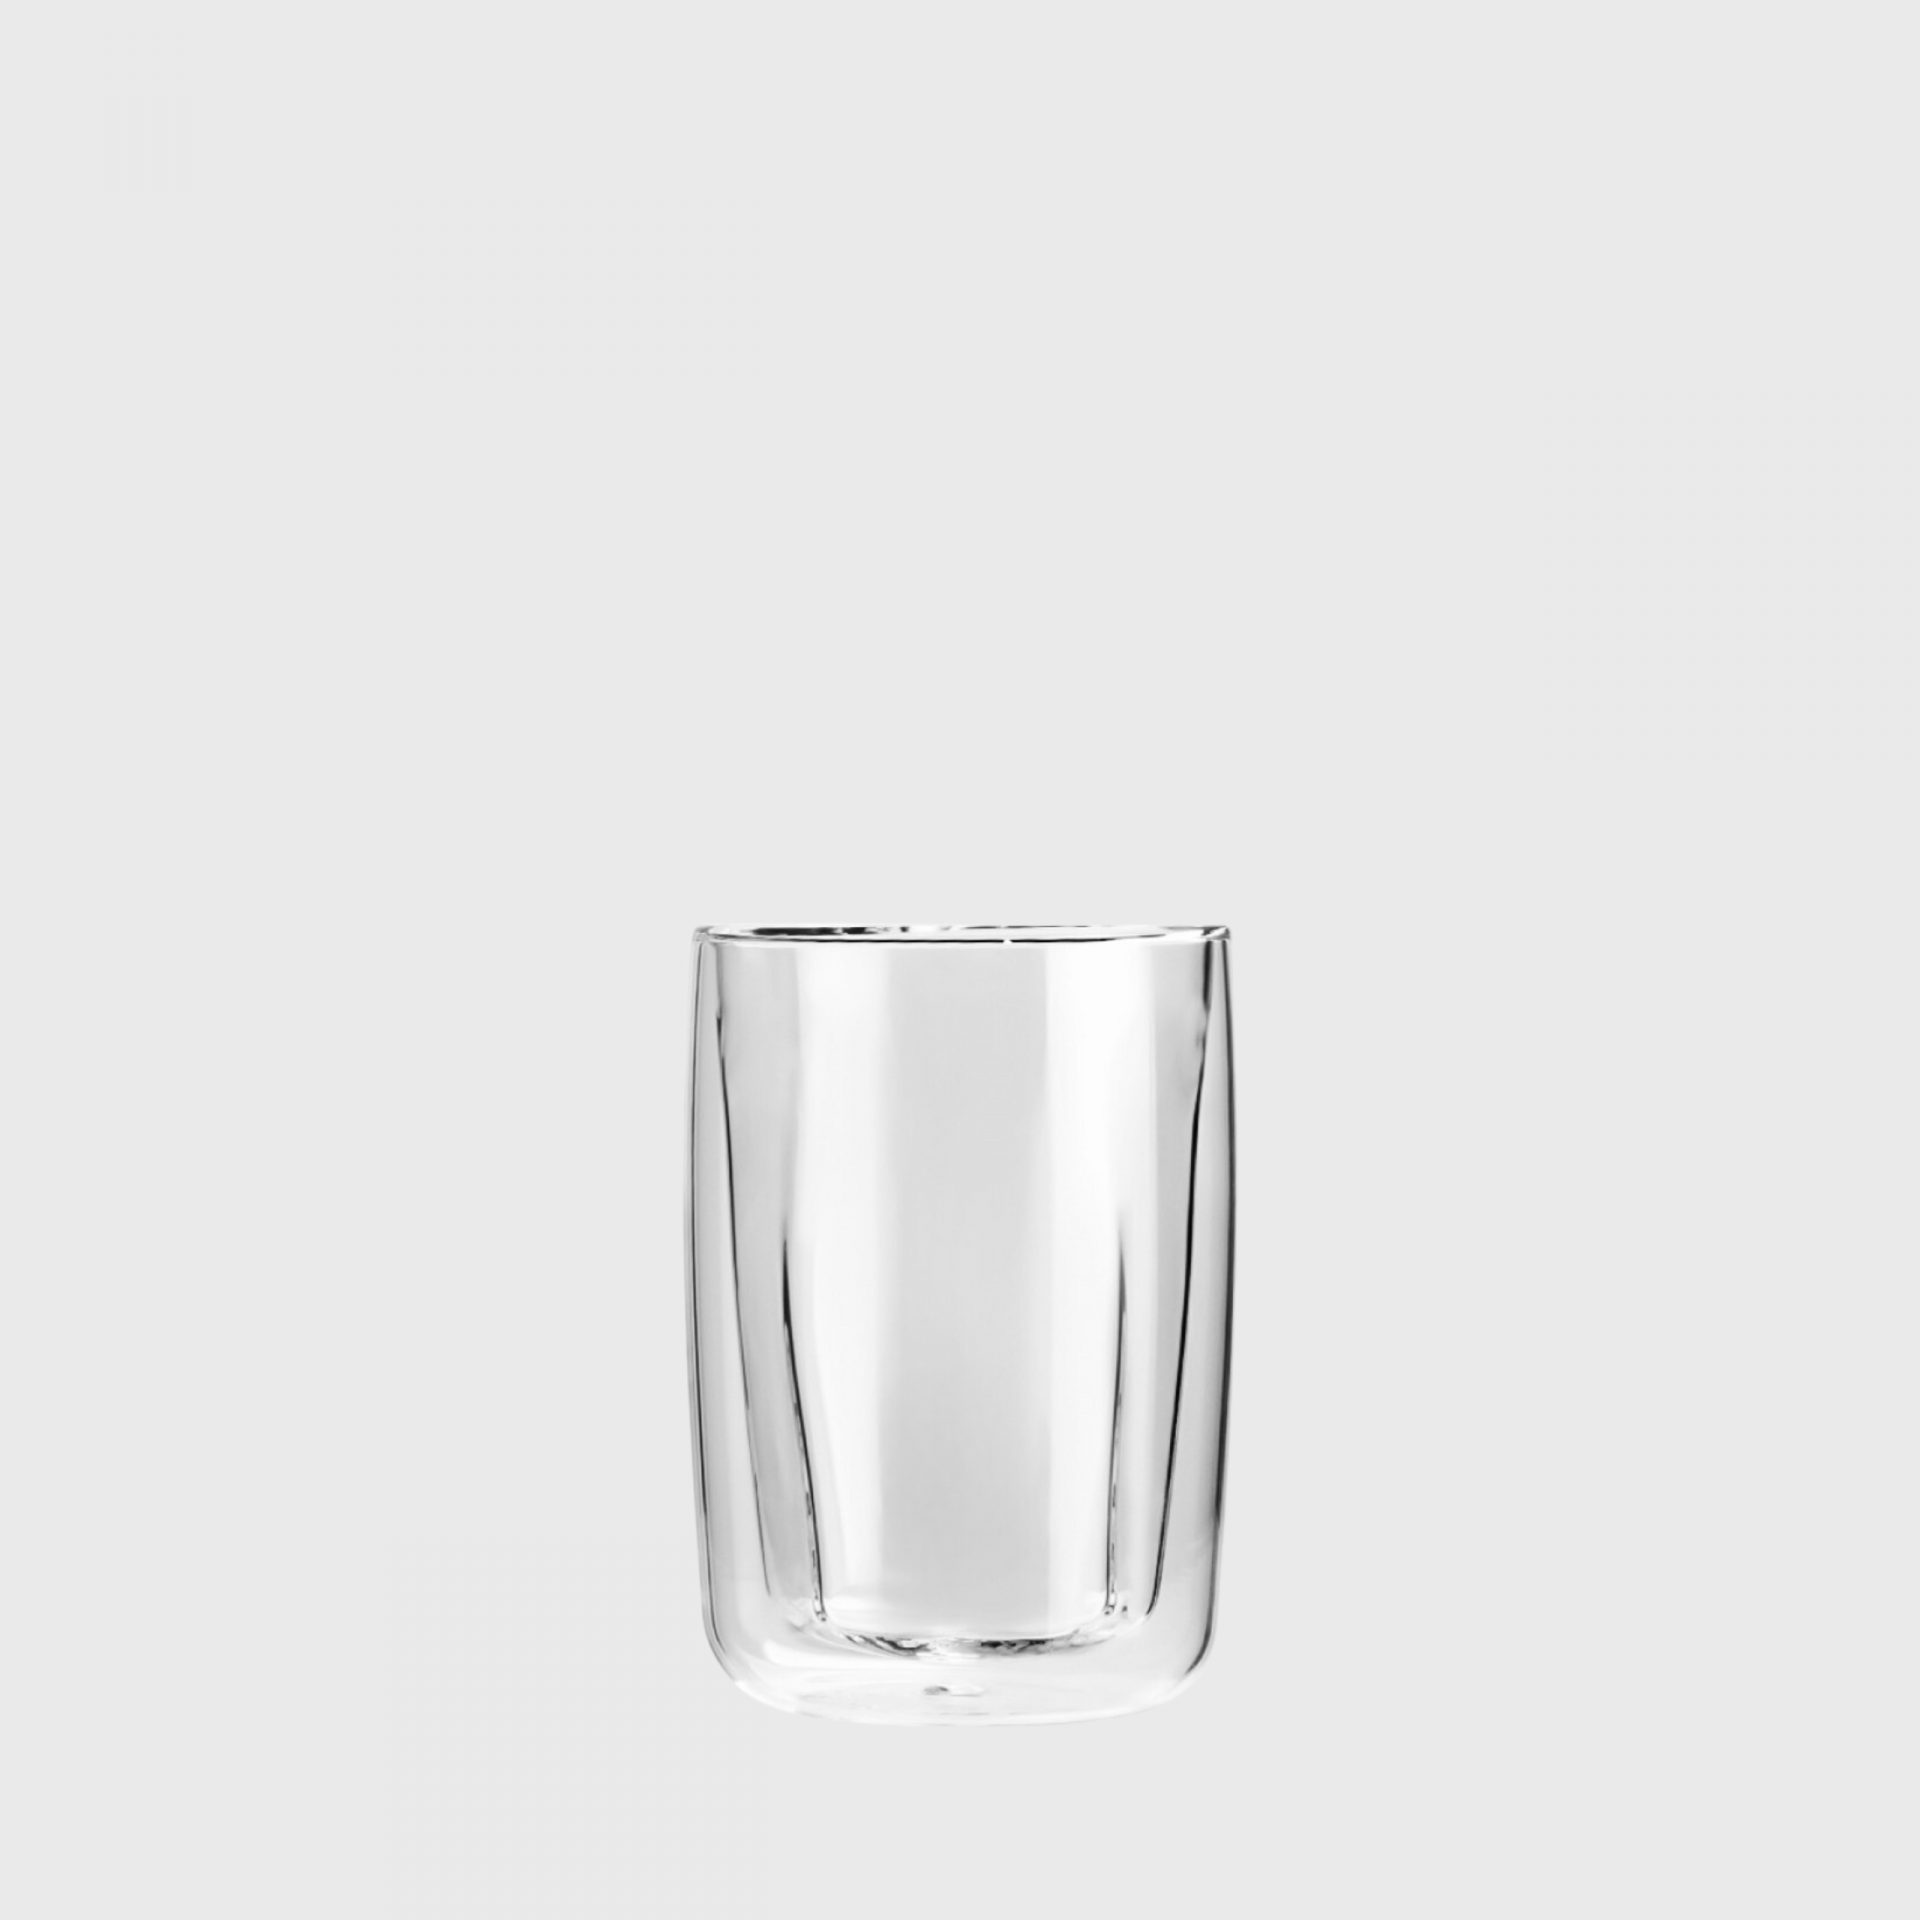 Sustainable Corporate Gifts Singapore double walled glass made from recycled glass